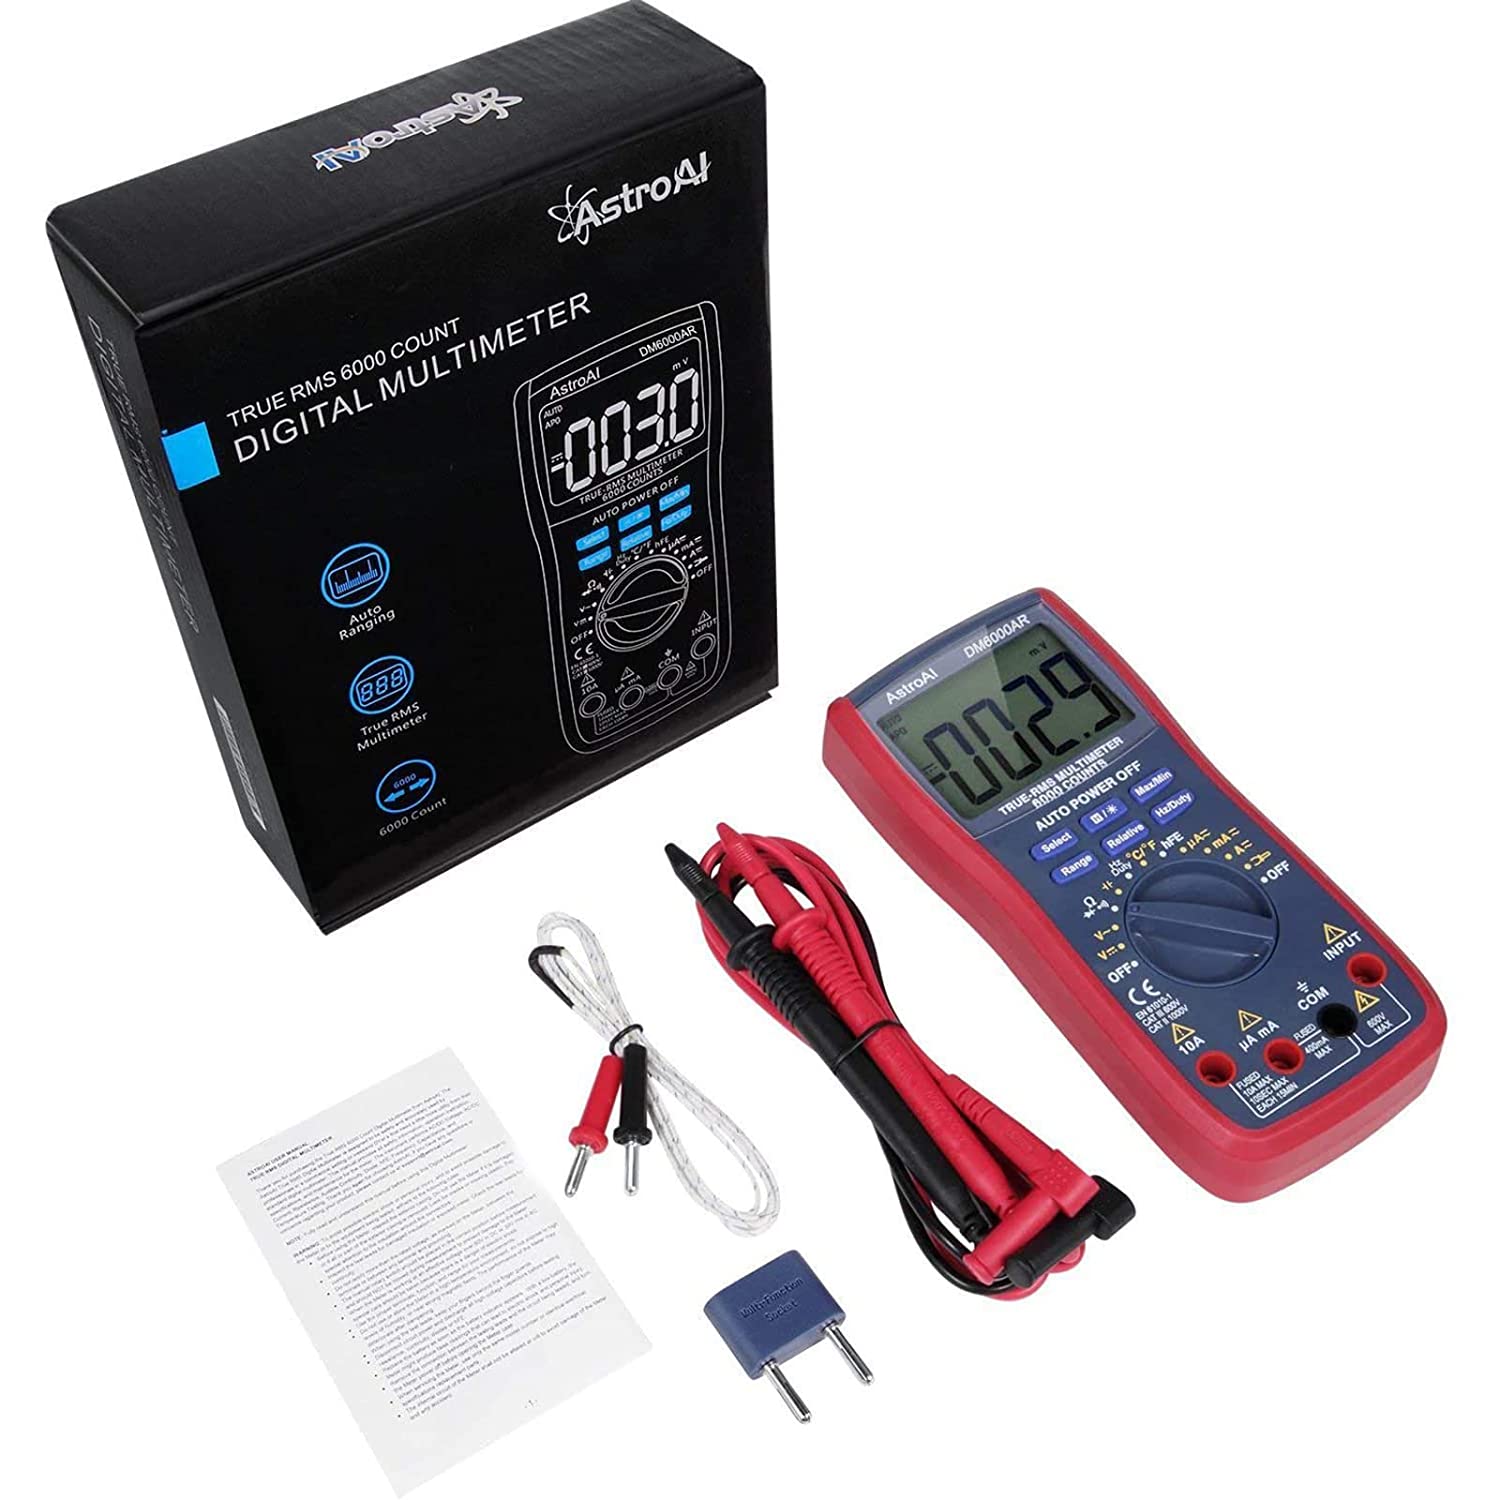 Digital Multimeter, AstroAI TRMS 6000 Counts Electrical Tester, Large Screen, Accurately Measures - image 5 of 9